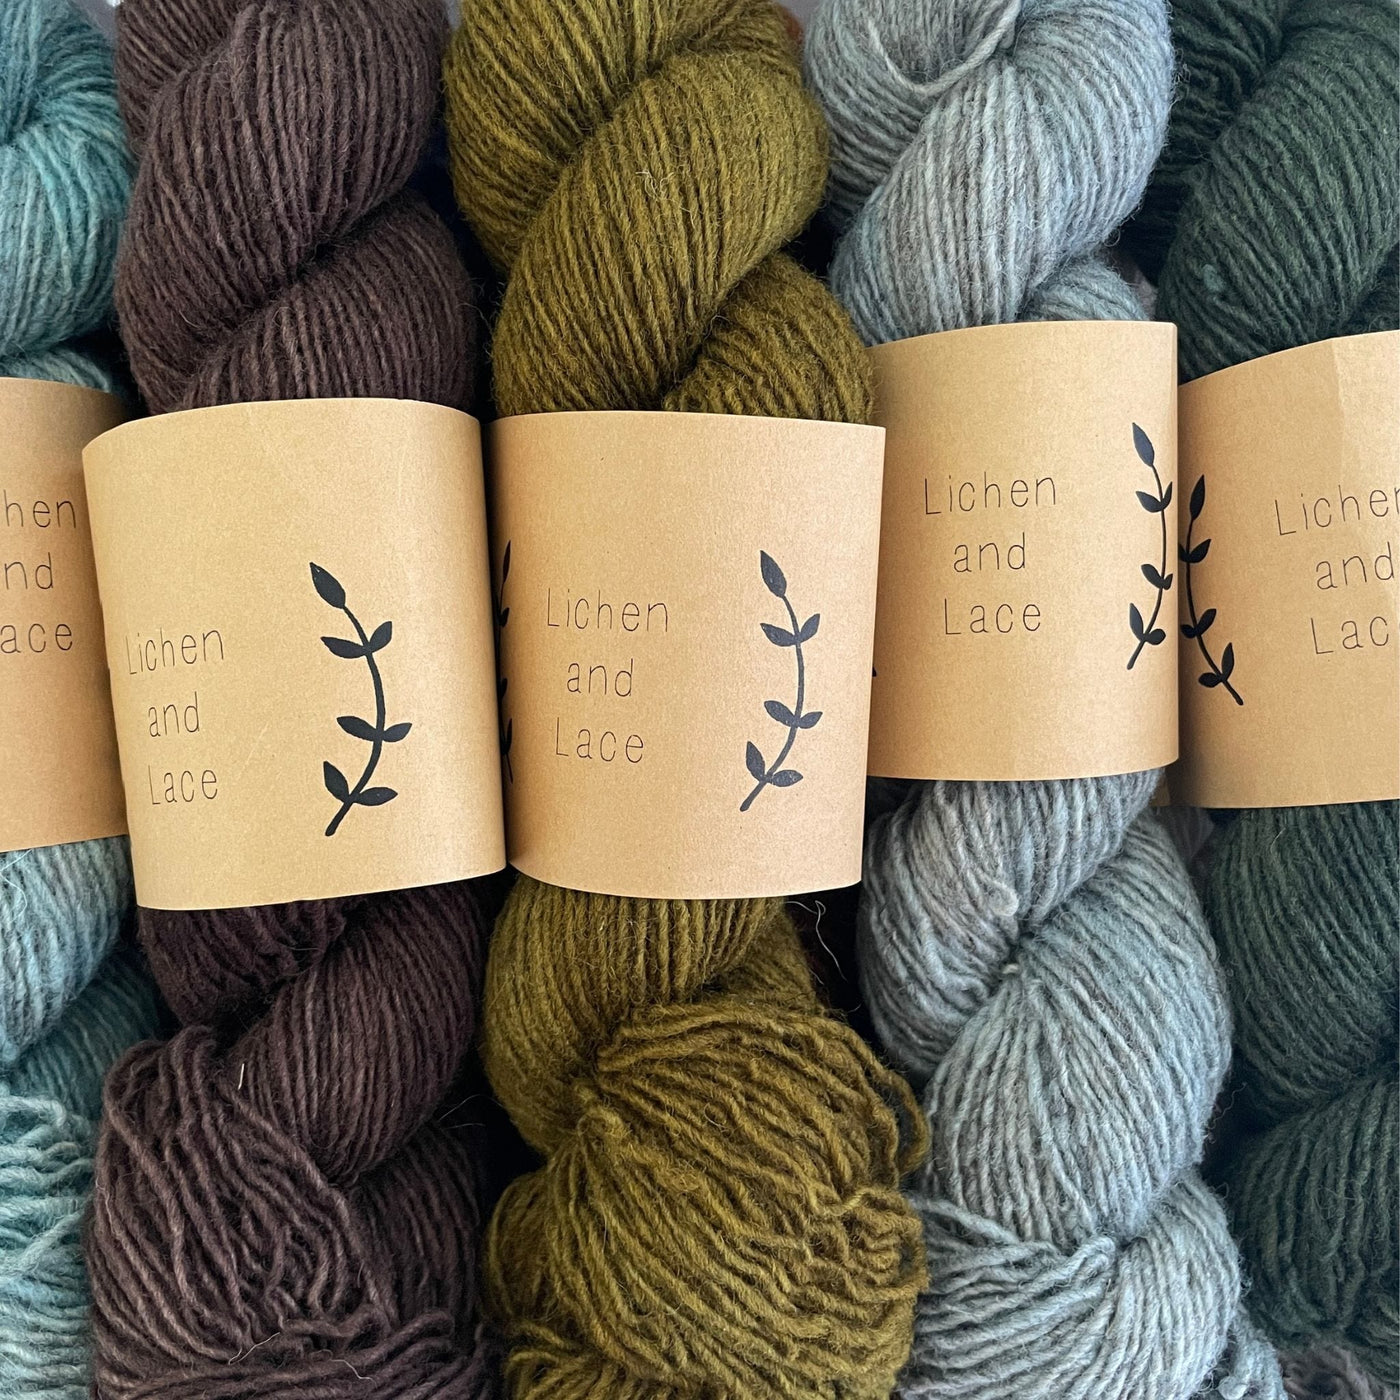 Several skeins of Lichen & Lace Rustic Heather Sport, a sport weight single-ply yarn